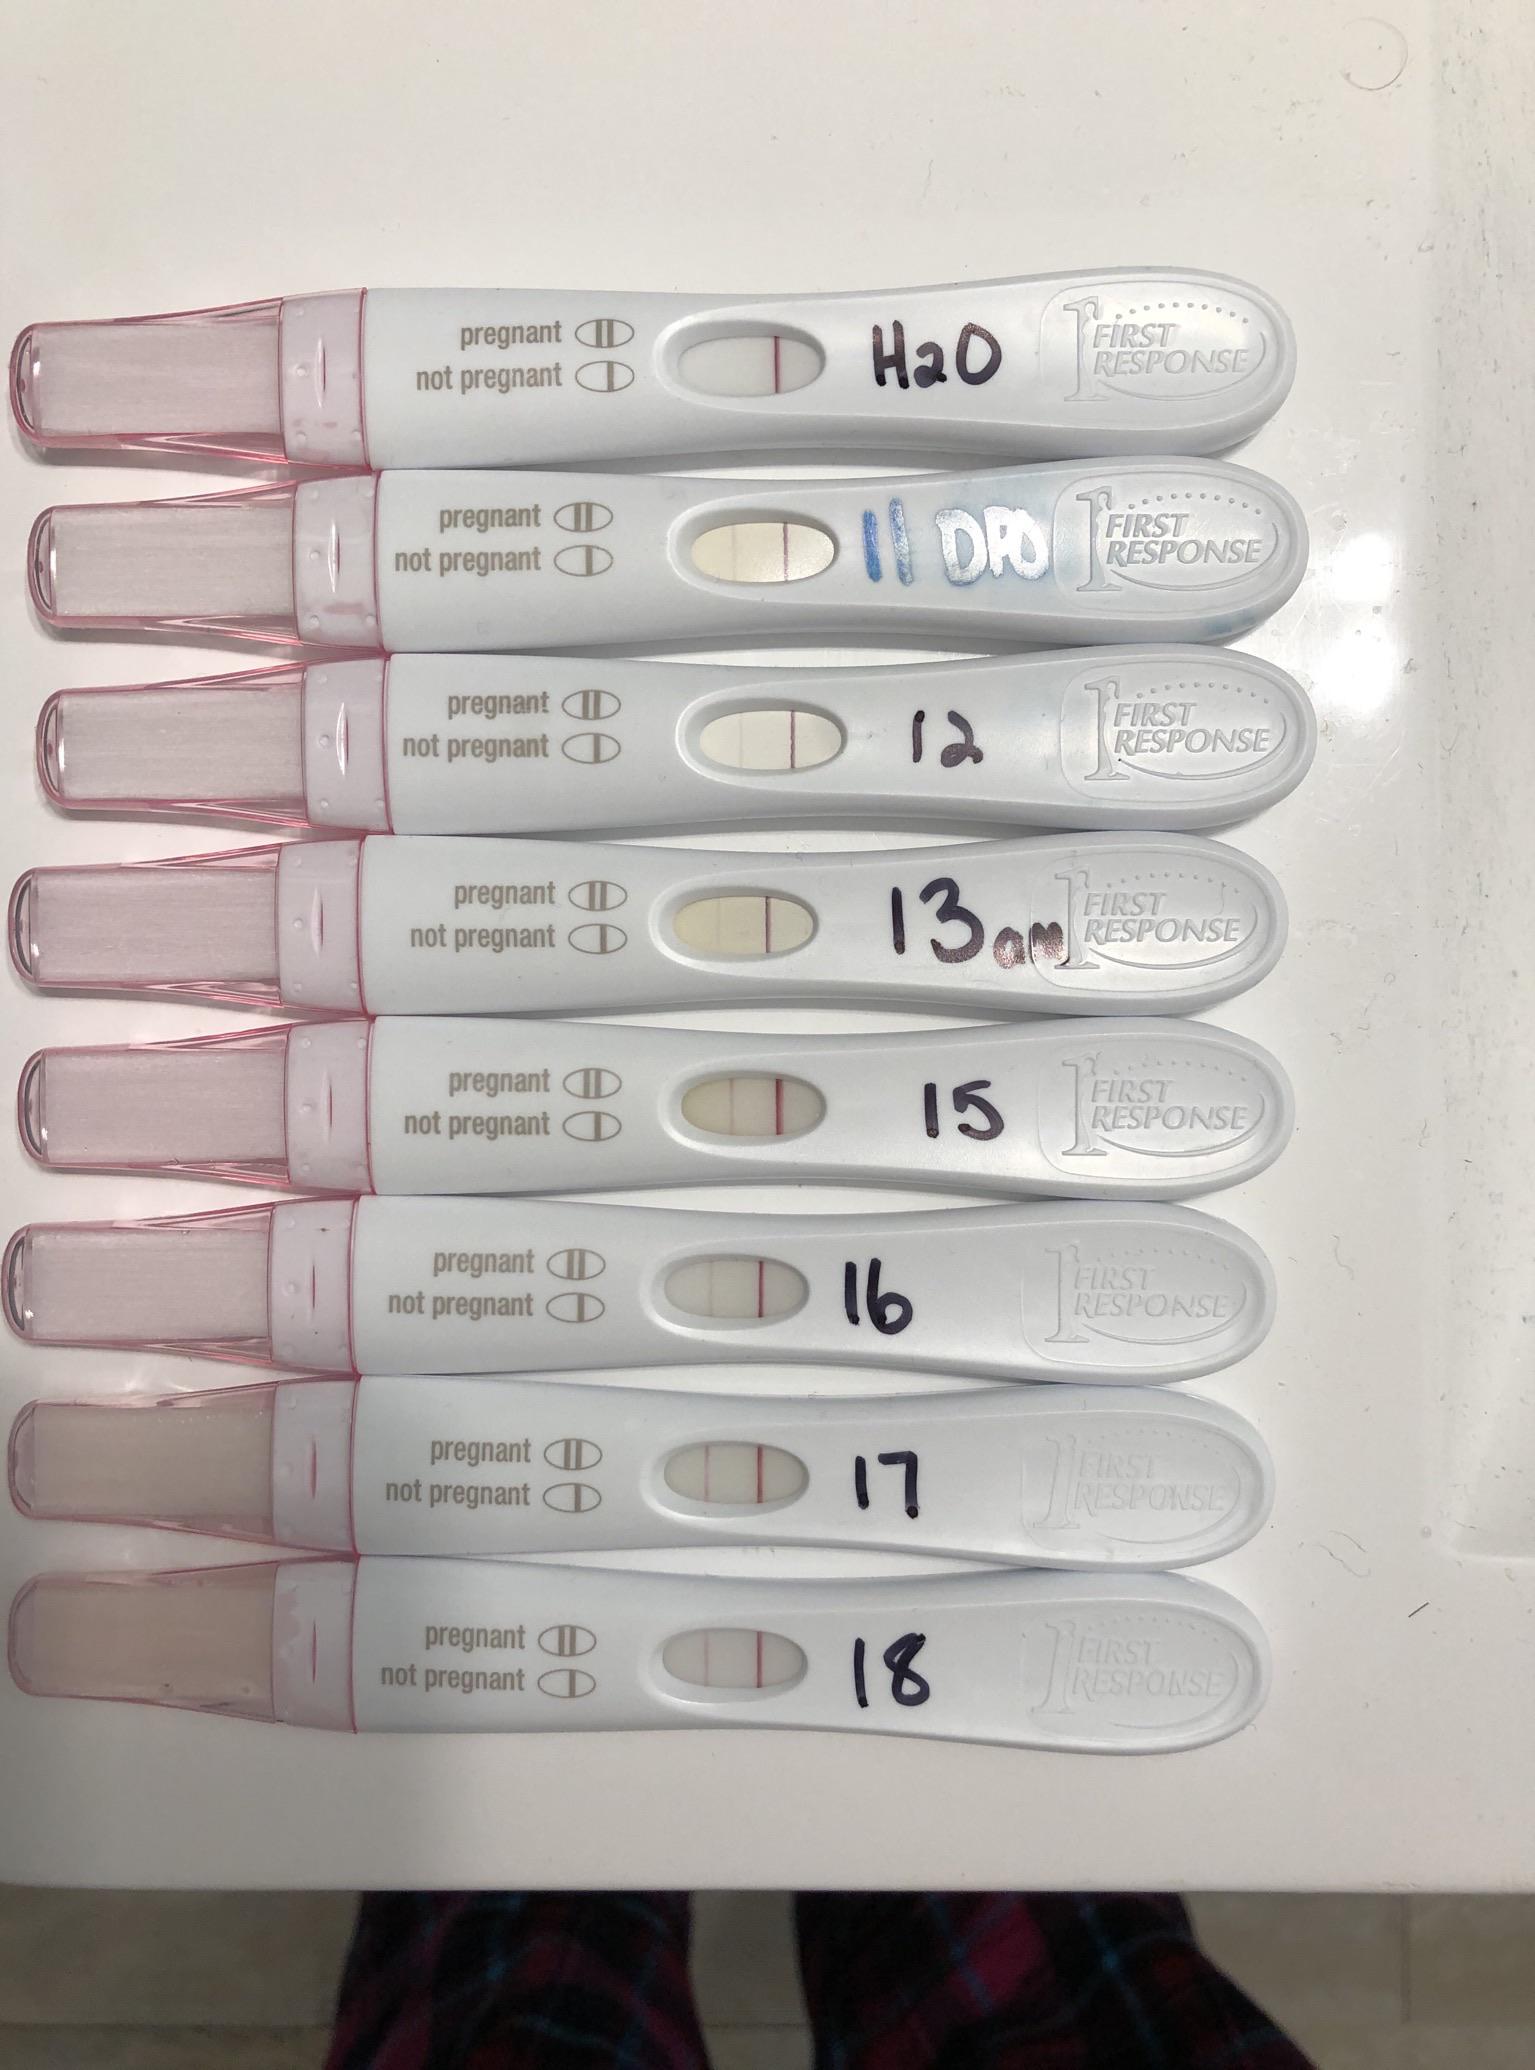 Posted at 15 DPO about bleeding. Tested 16,17,18DPO, (FRER ...